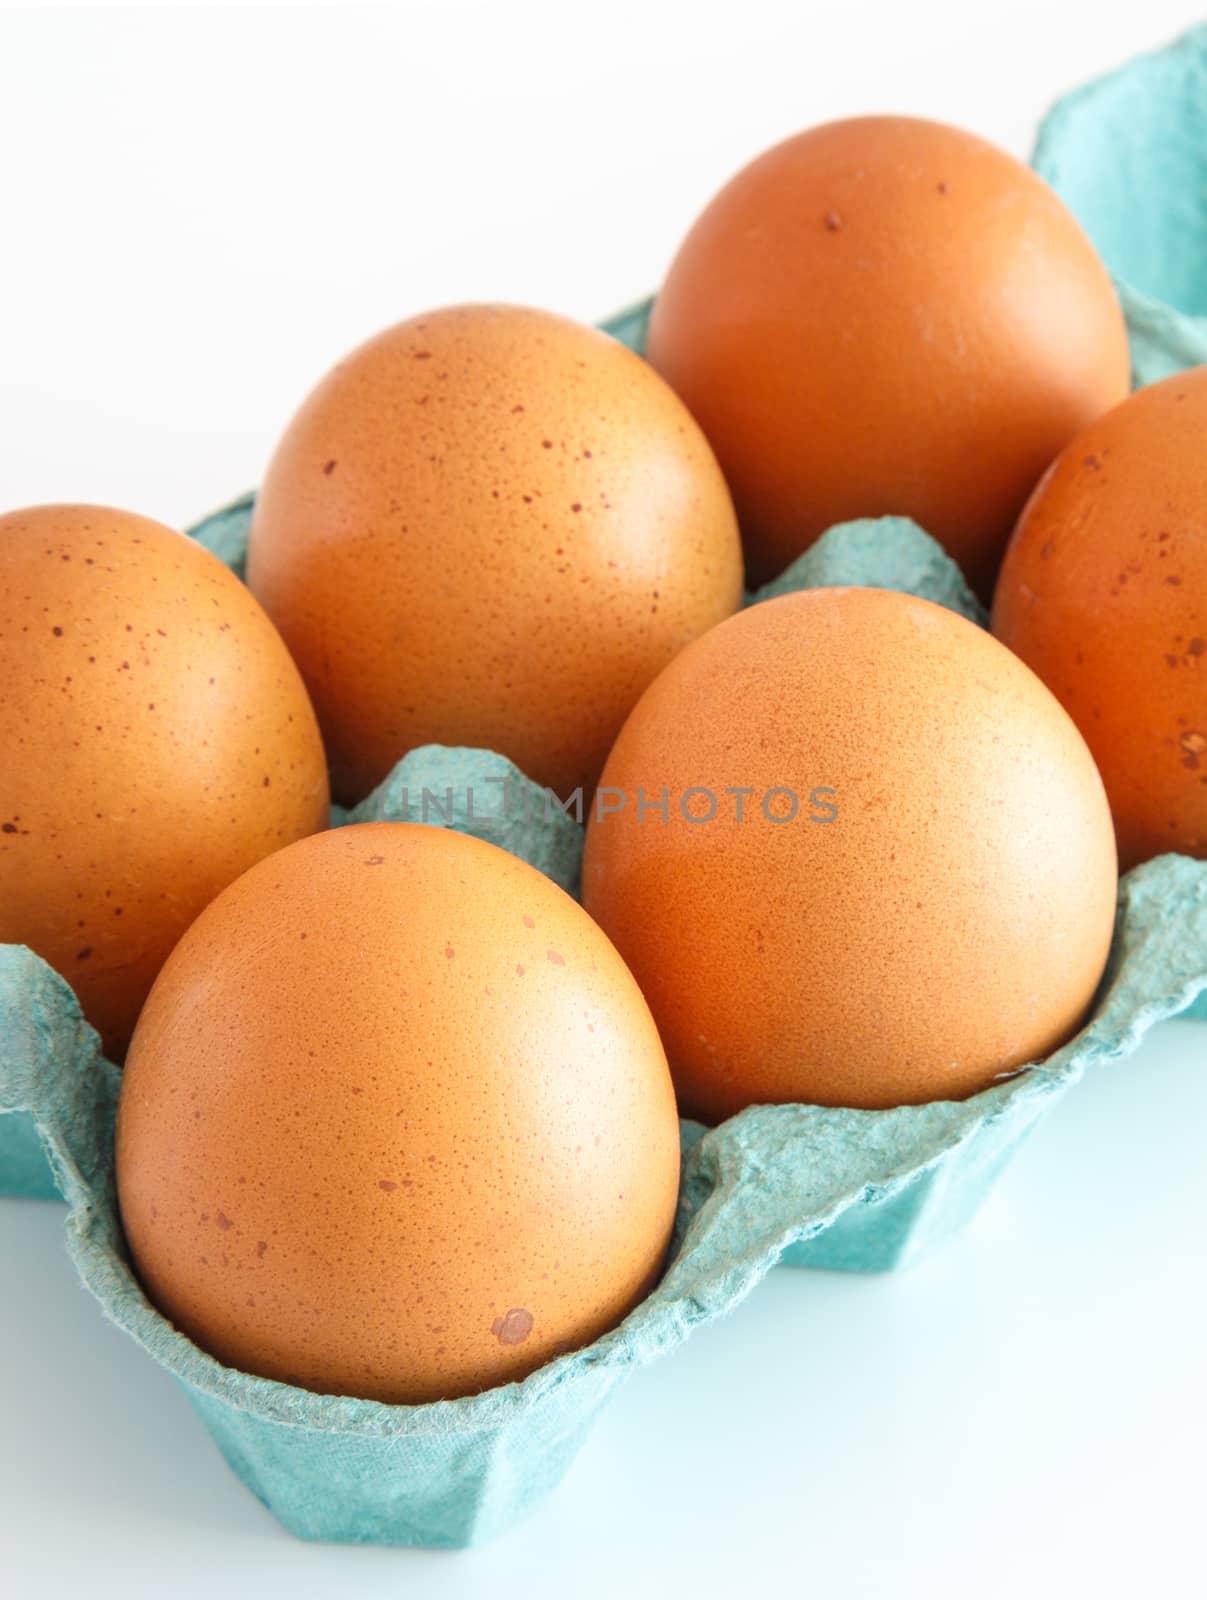 View of opened box of chicken eggs for market place